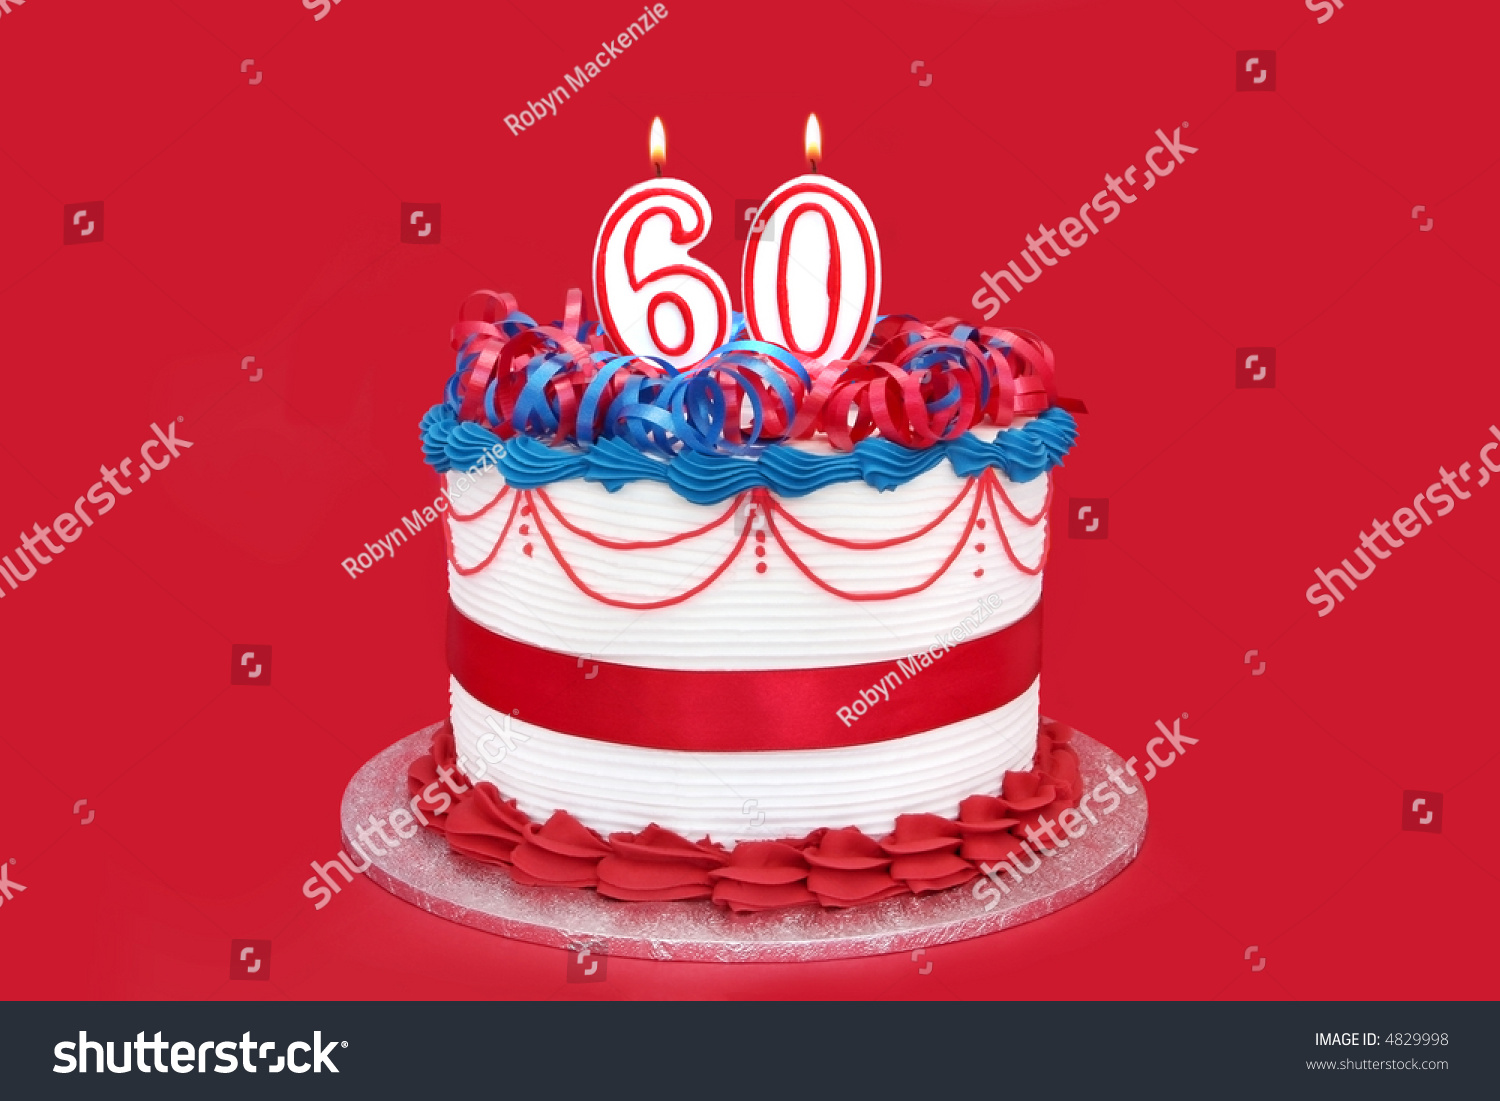 powerpoint-template-60th-birthday-cake-with-numeral-lpjuuup